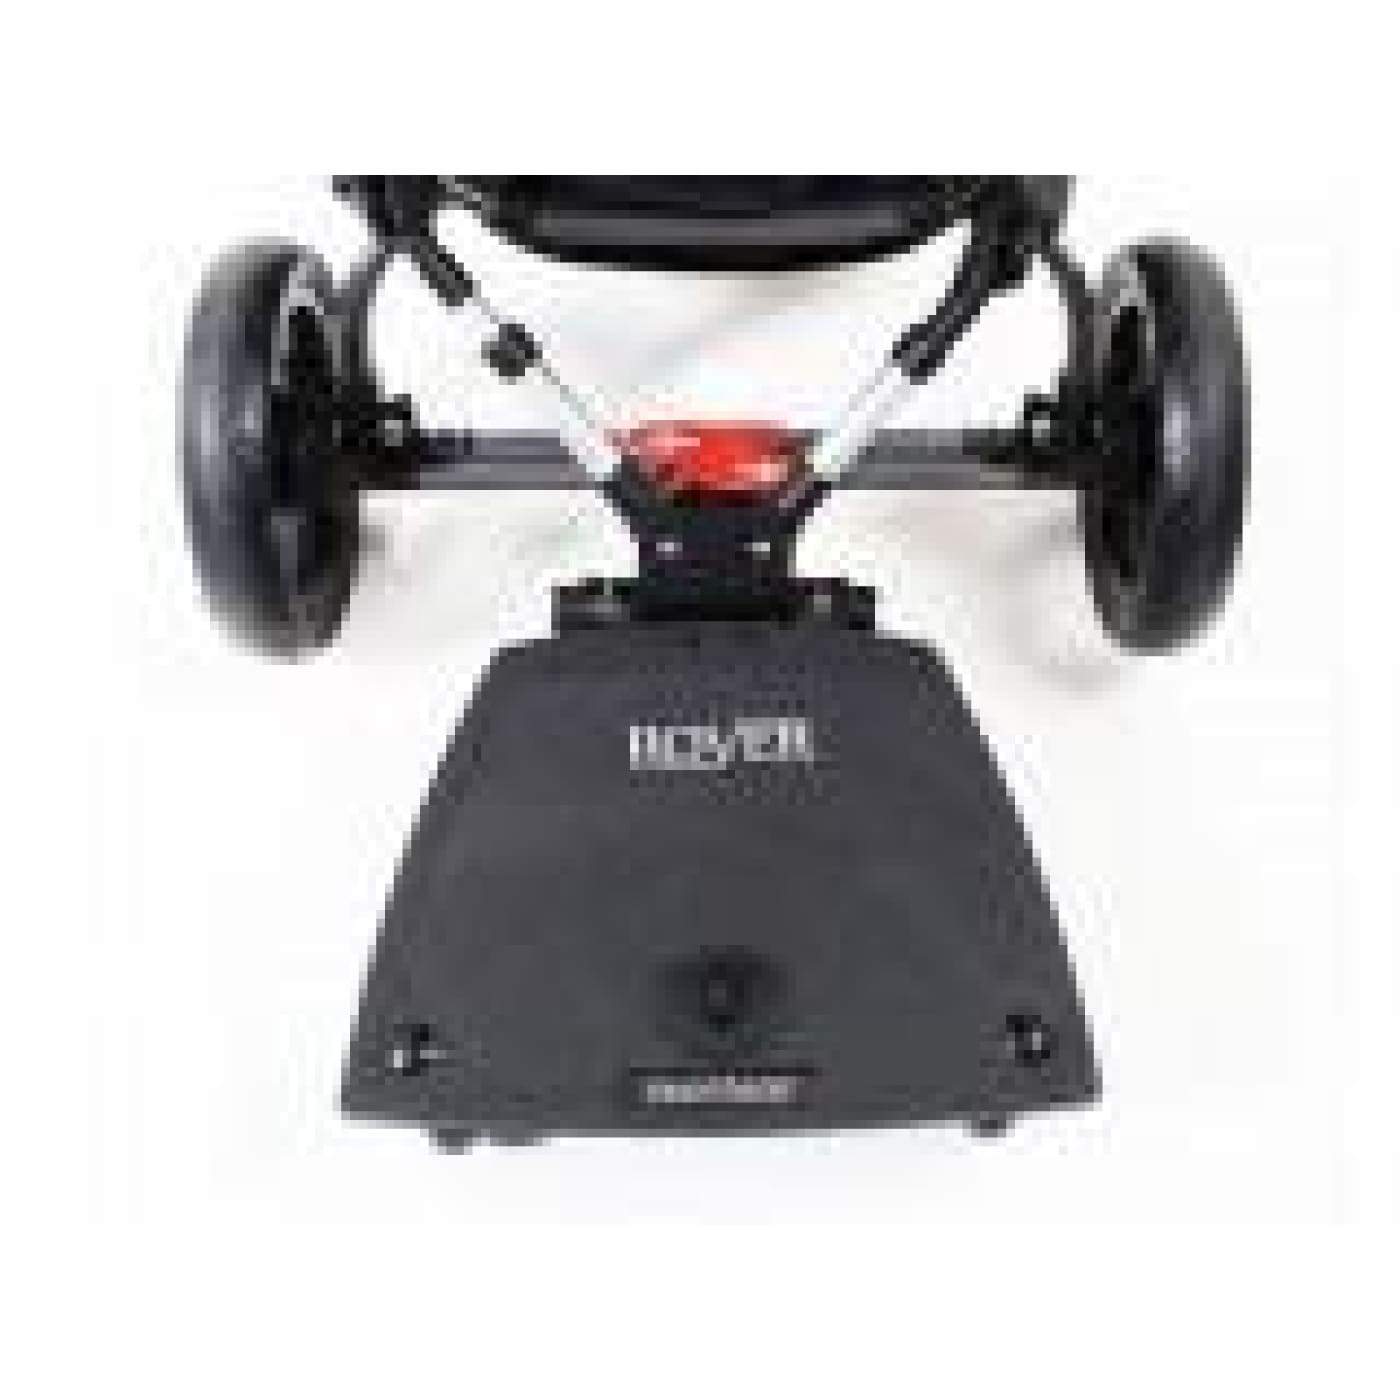 Valco Baby Rover Rider (Available End February) - PRAMS & STROLLERS - SKATE BOARDS